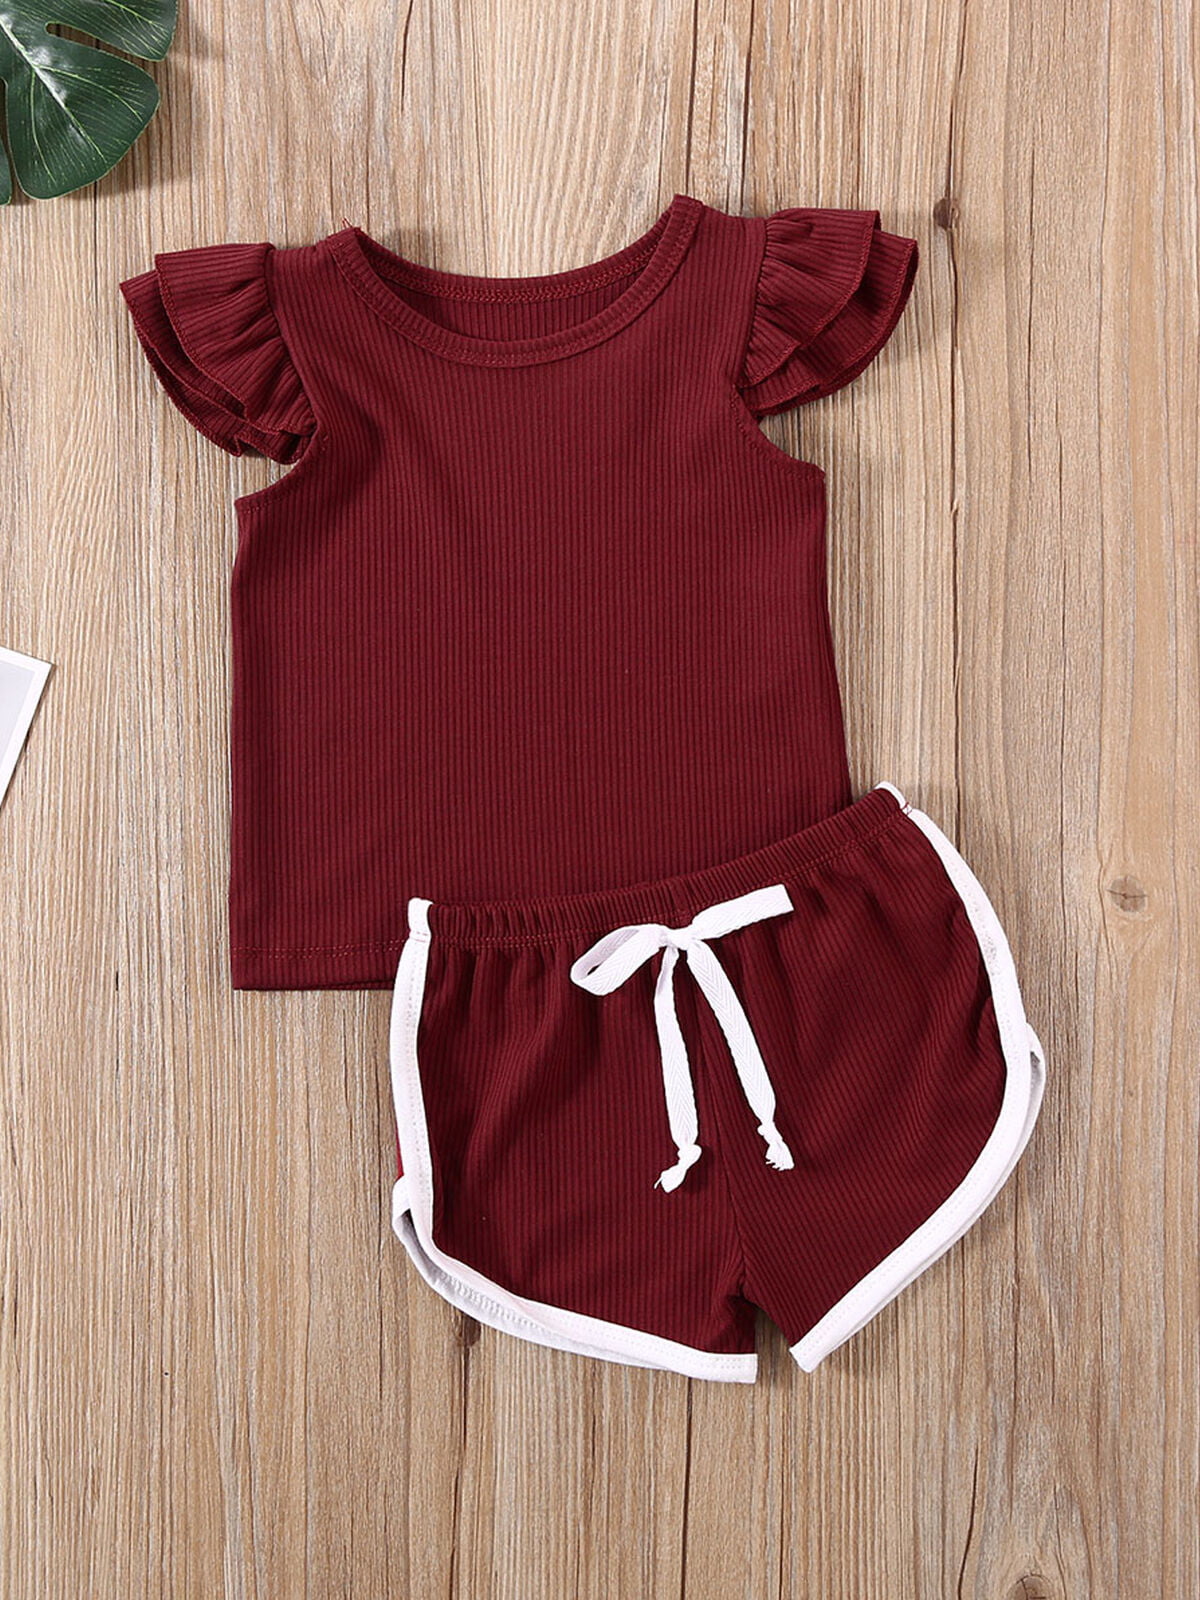 Details about   Toddler Kids Baby Girls Outfits Casual T-shirt Dress Top Long Pants Clothes Set